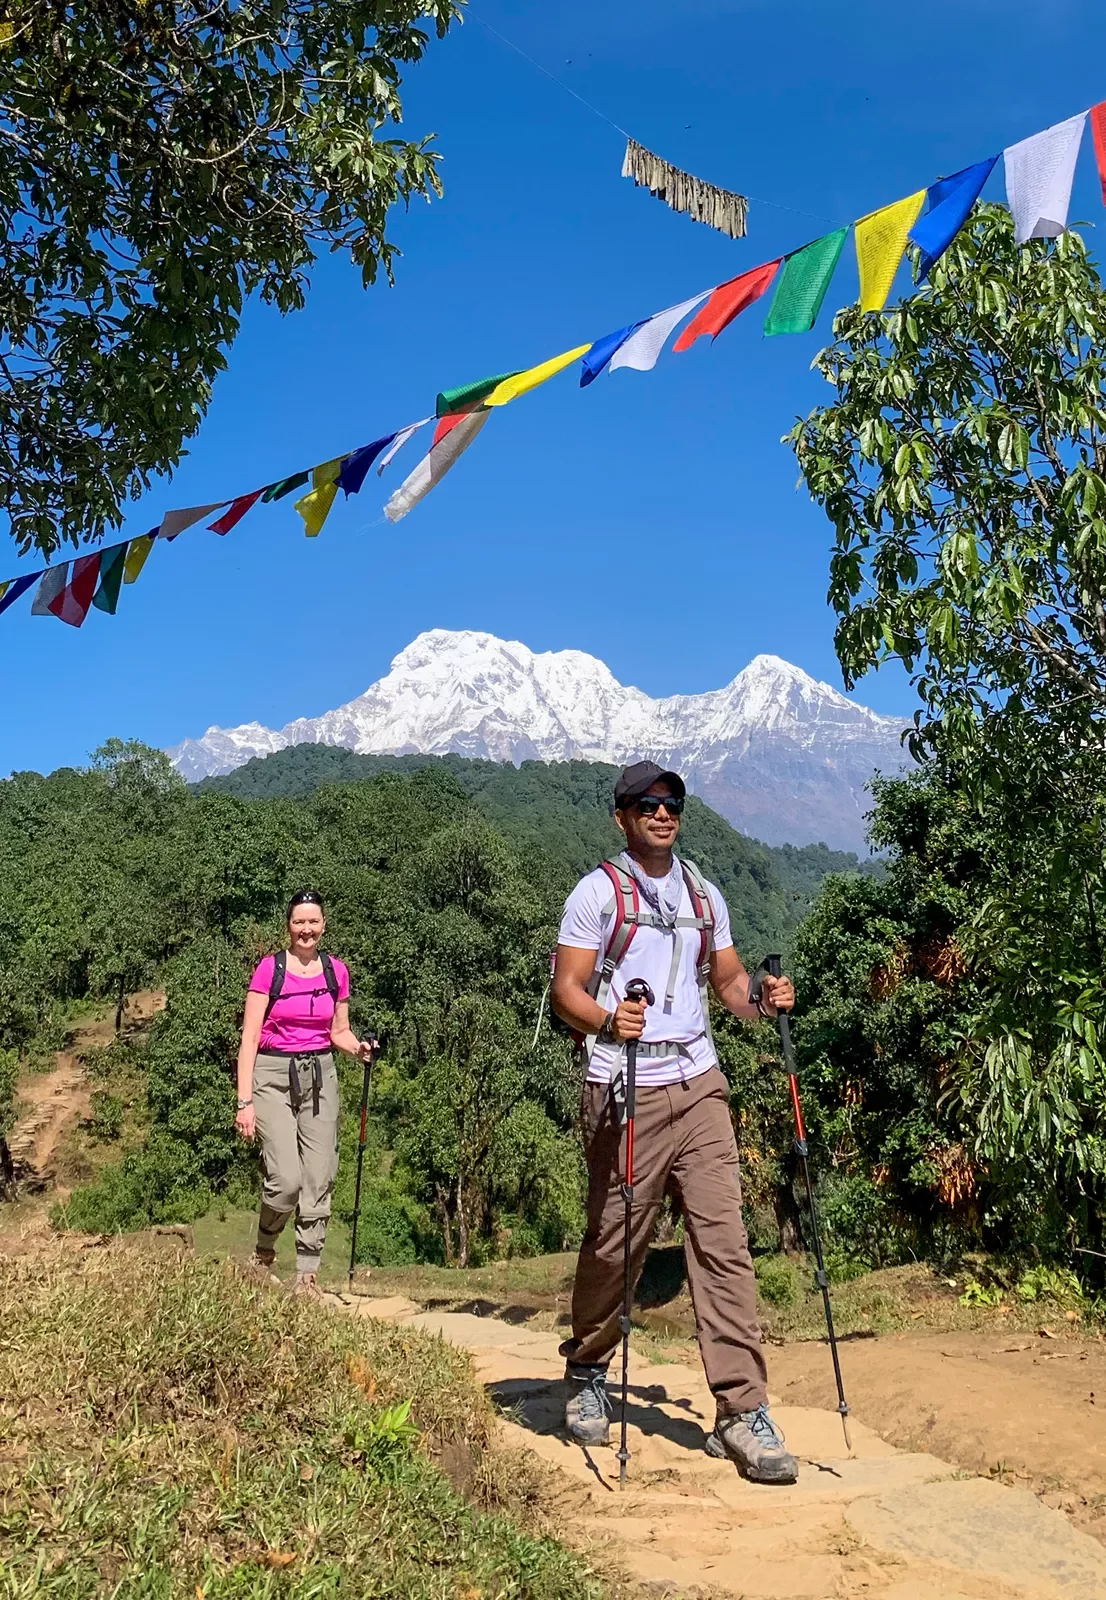 Hiking along a dirt path with mountains in the background in Nepal